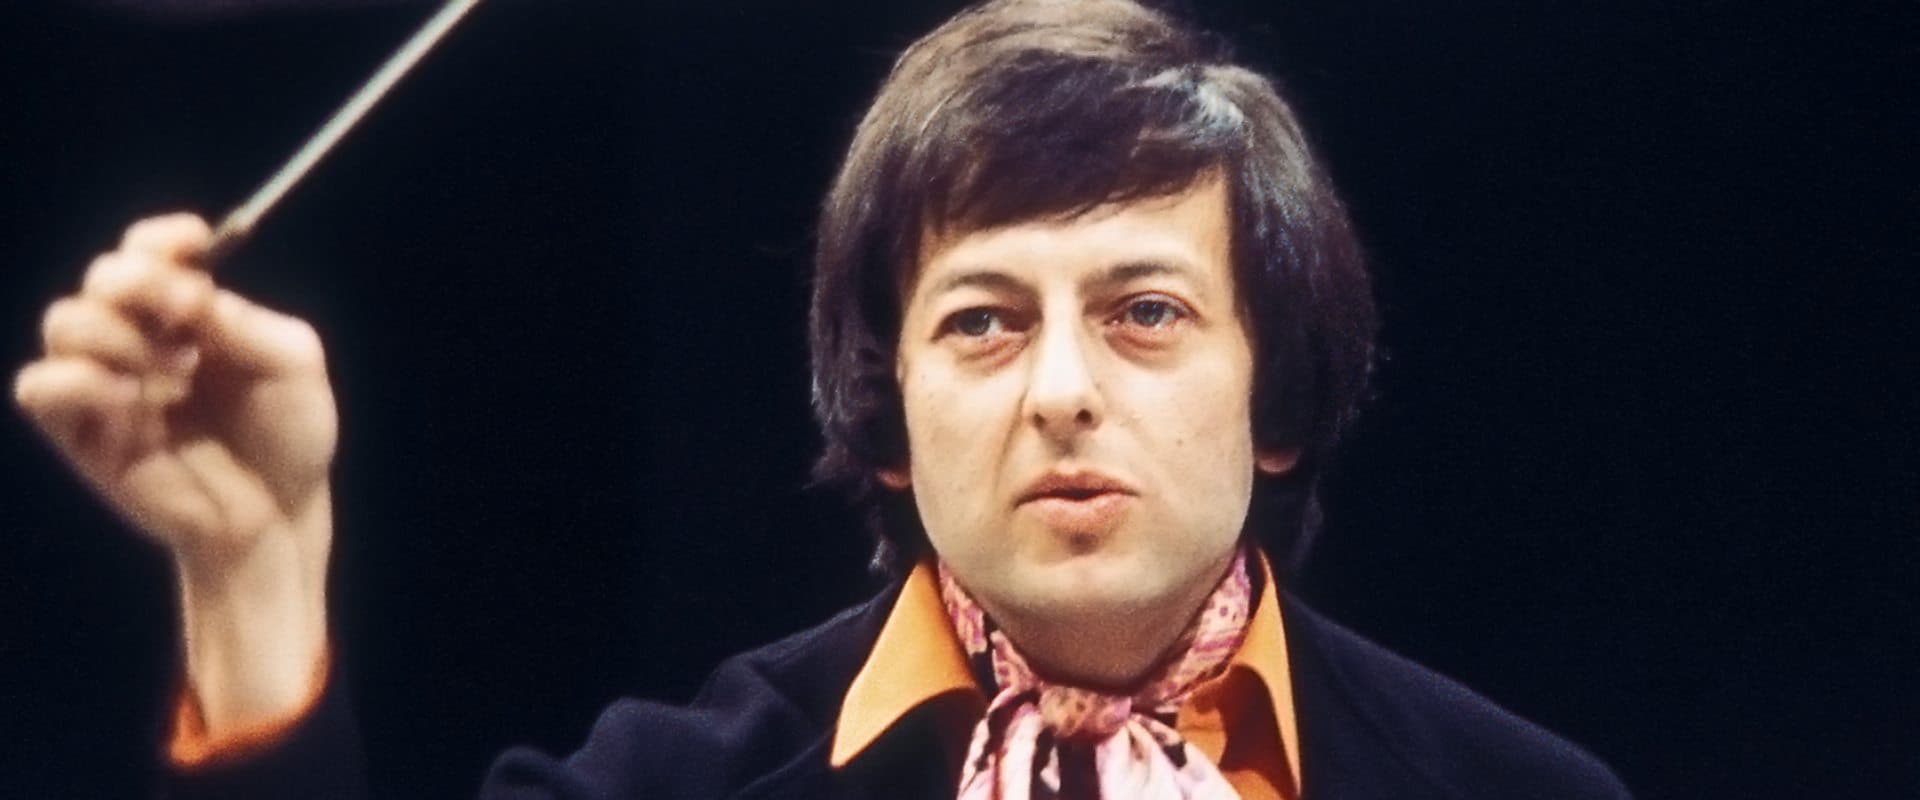 Andre Previn at the BBC